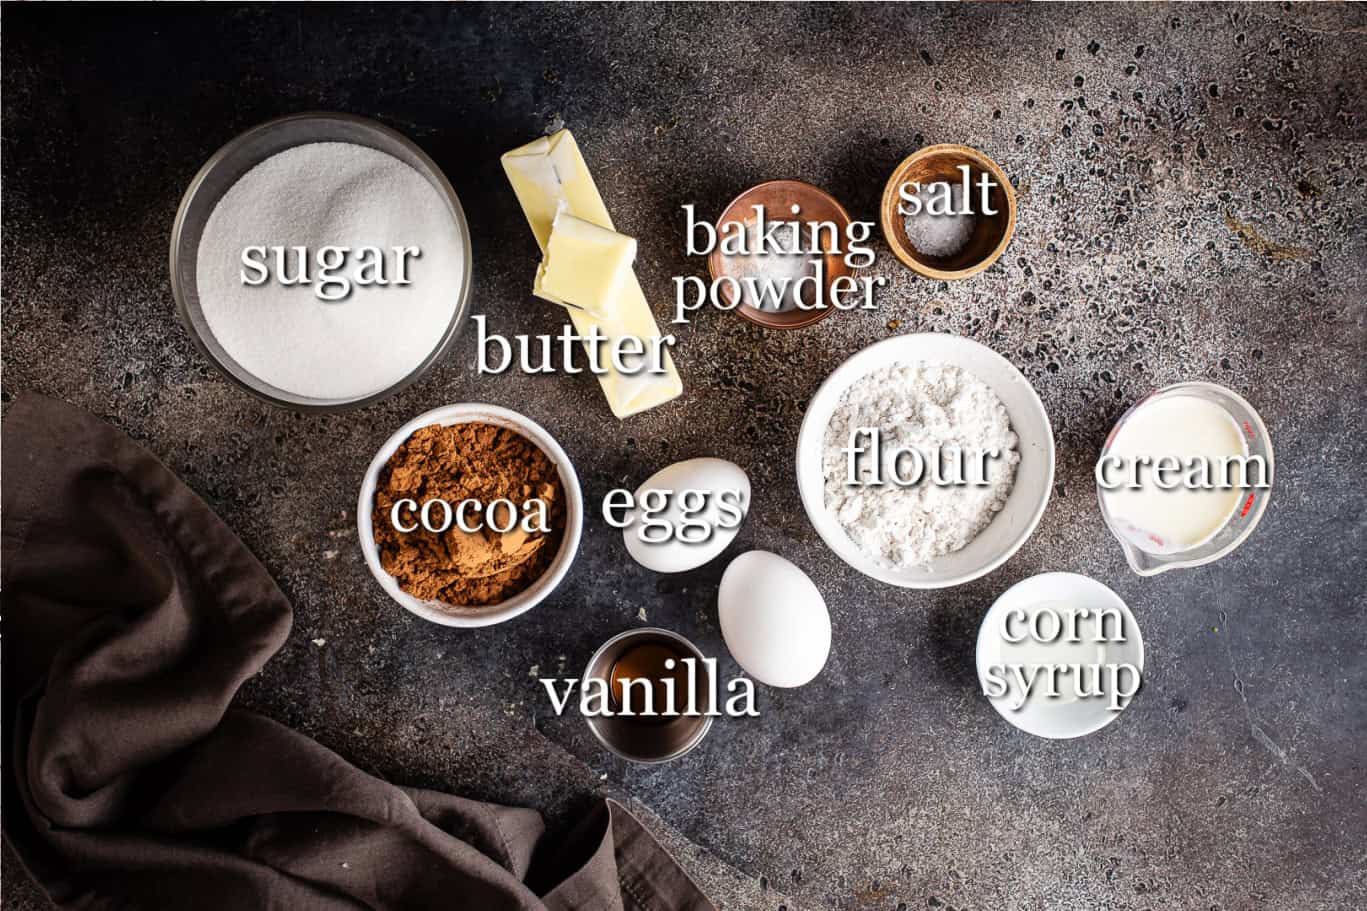 Ingredients for making salted caramel brownies, with text labels.